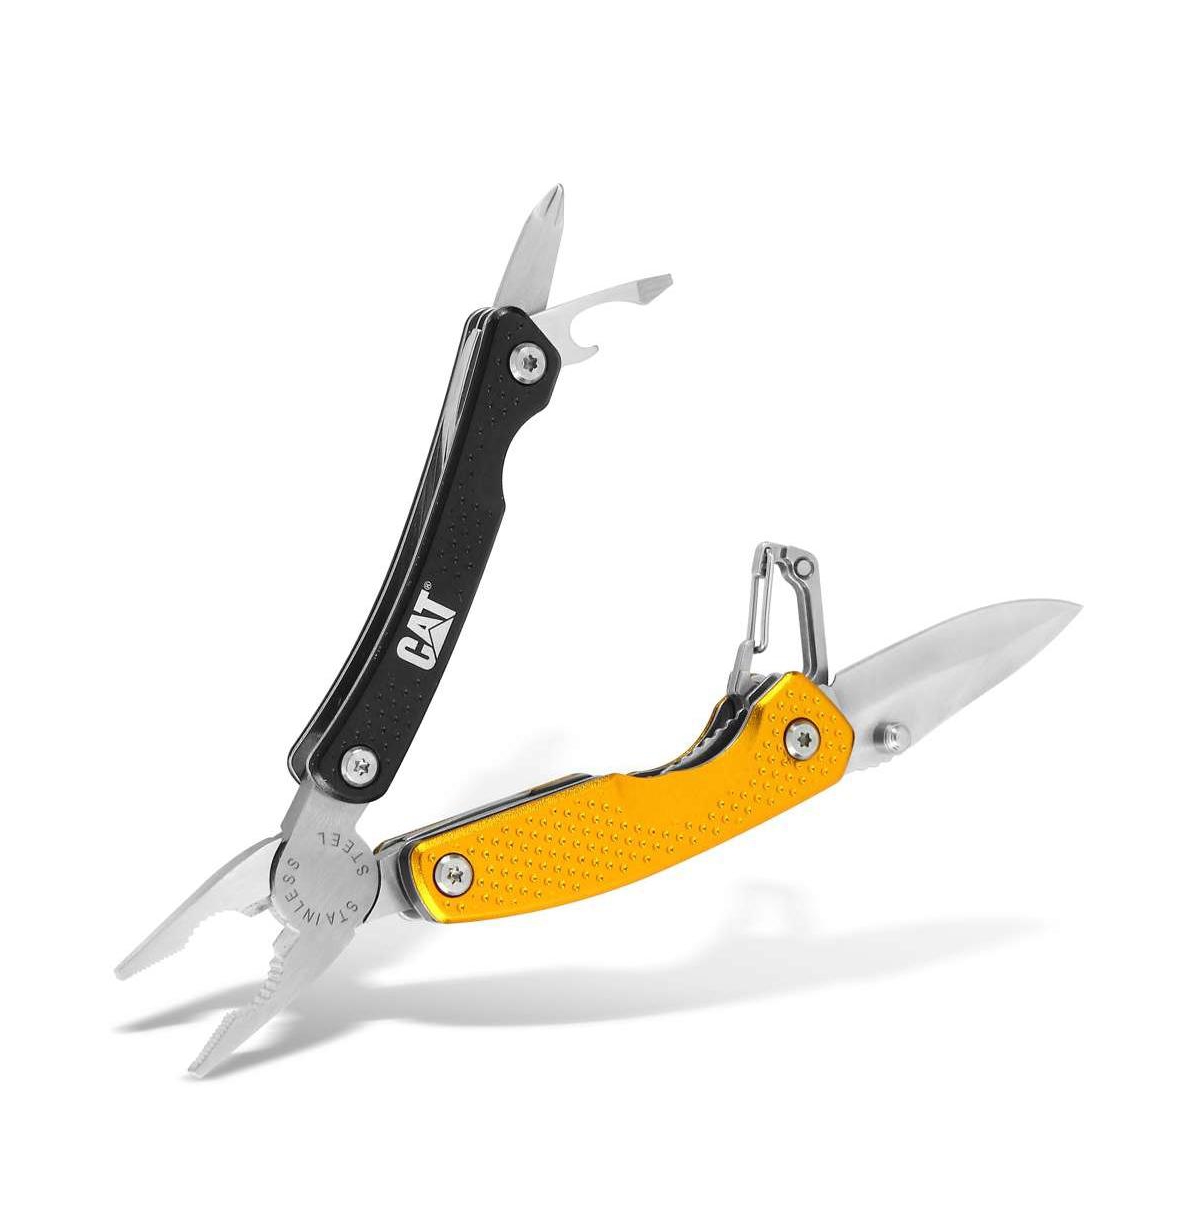 8-in-1 Multifunction Knife and Pliers Tool - Yellow